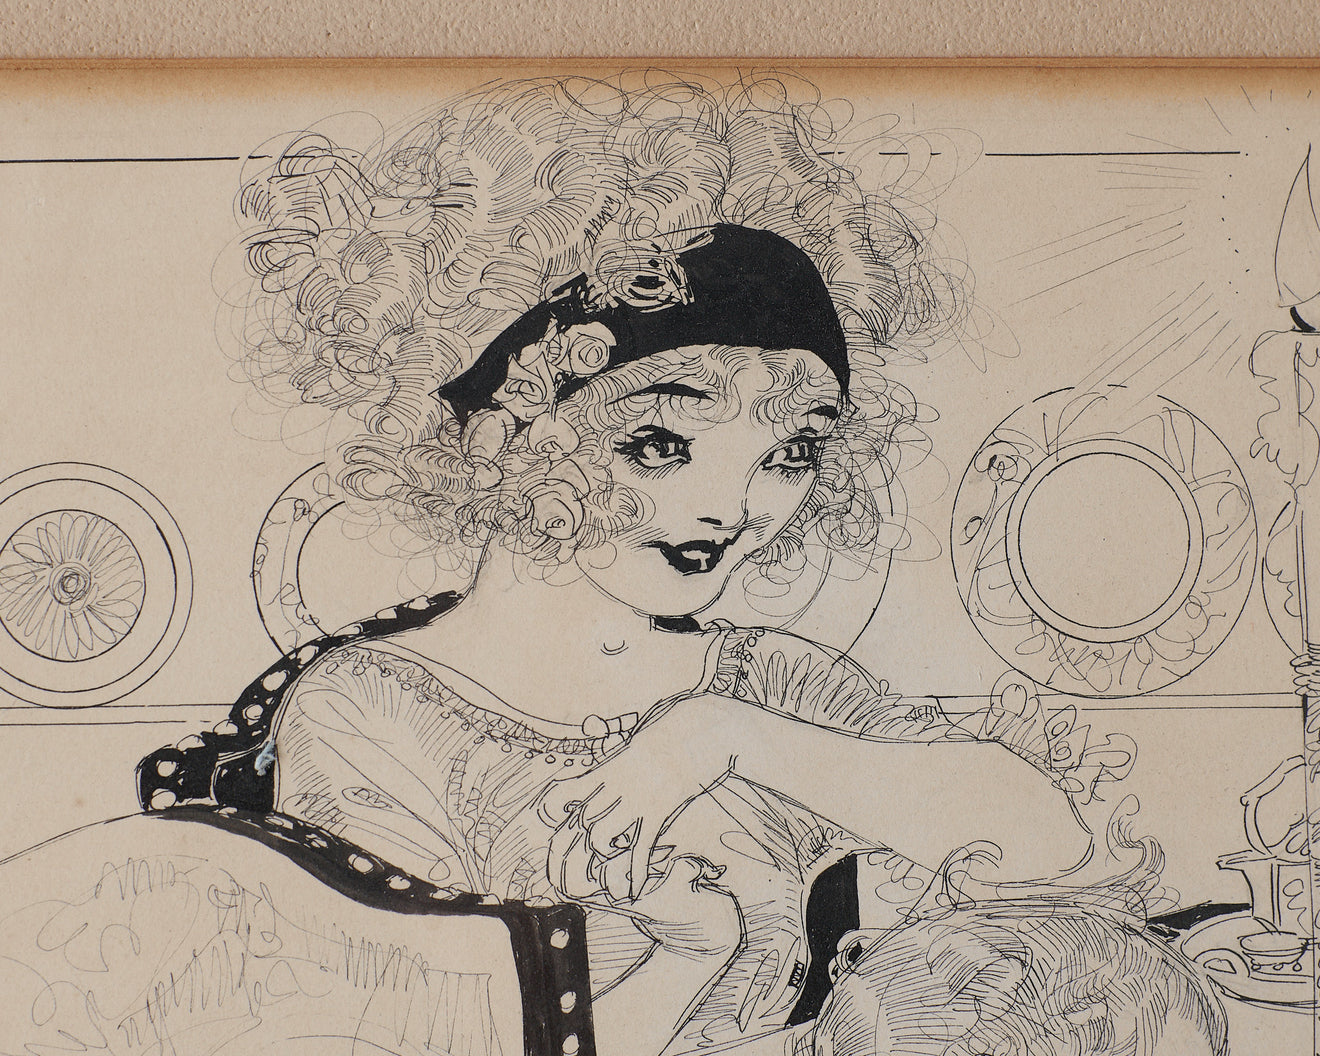 NELL BRINKLEY (1886-1944) PEN AND INK DRAWING, signed